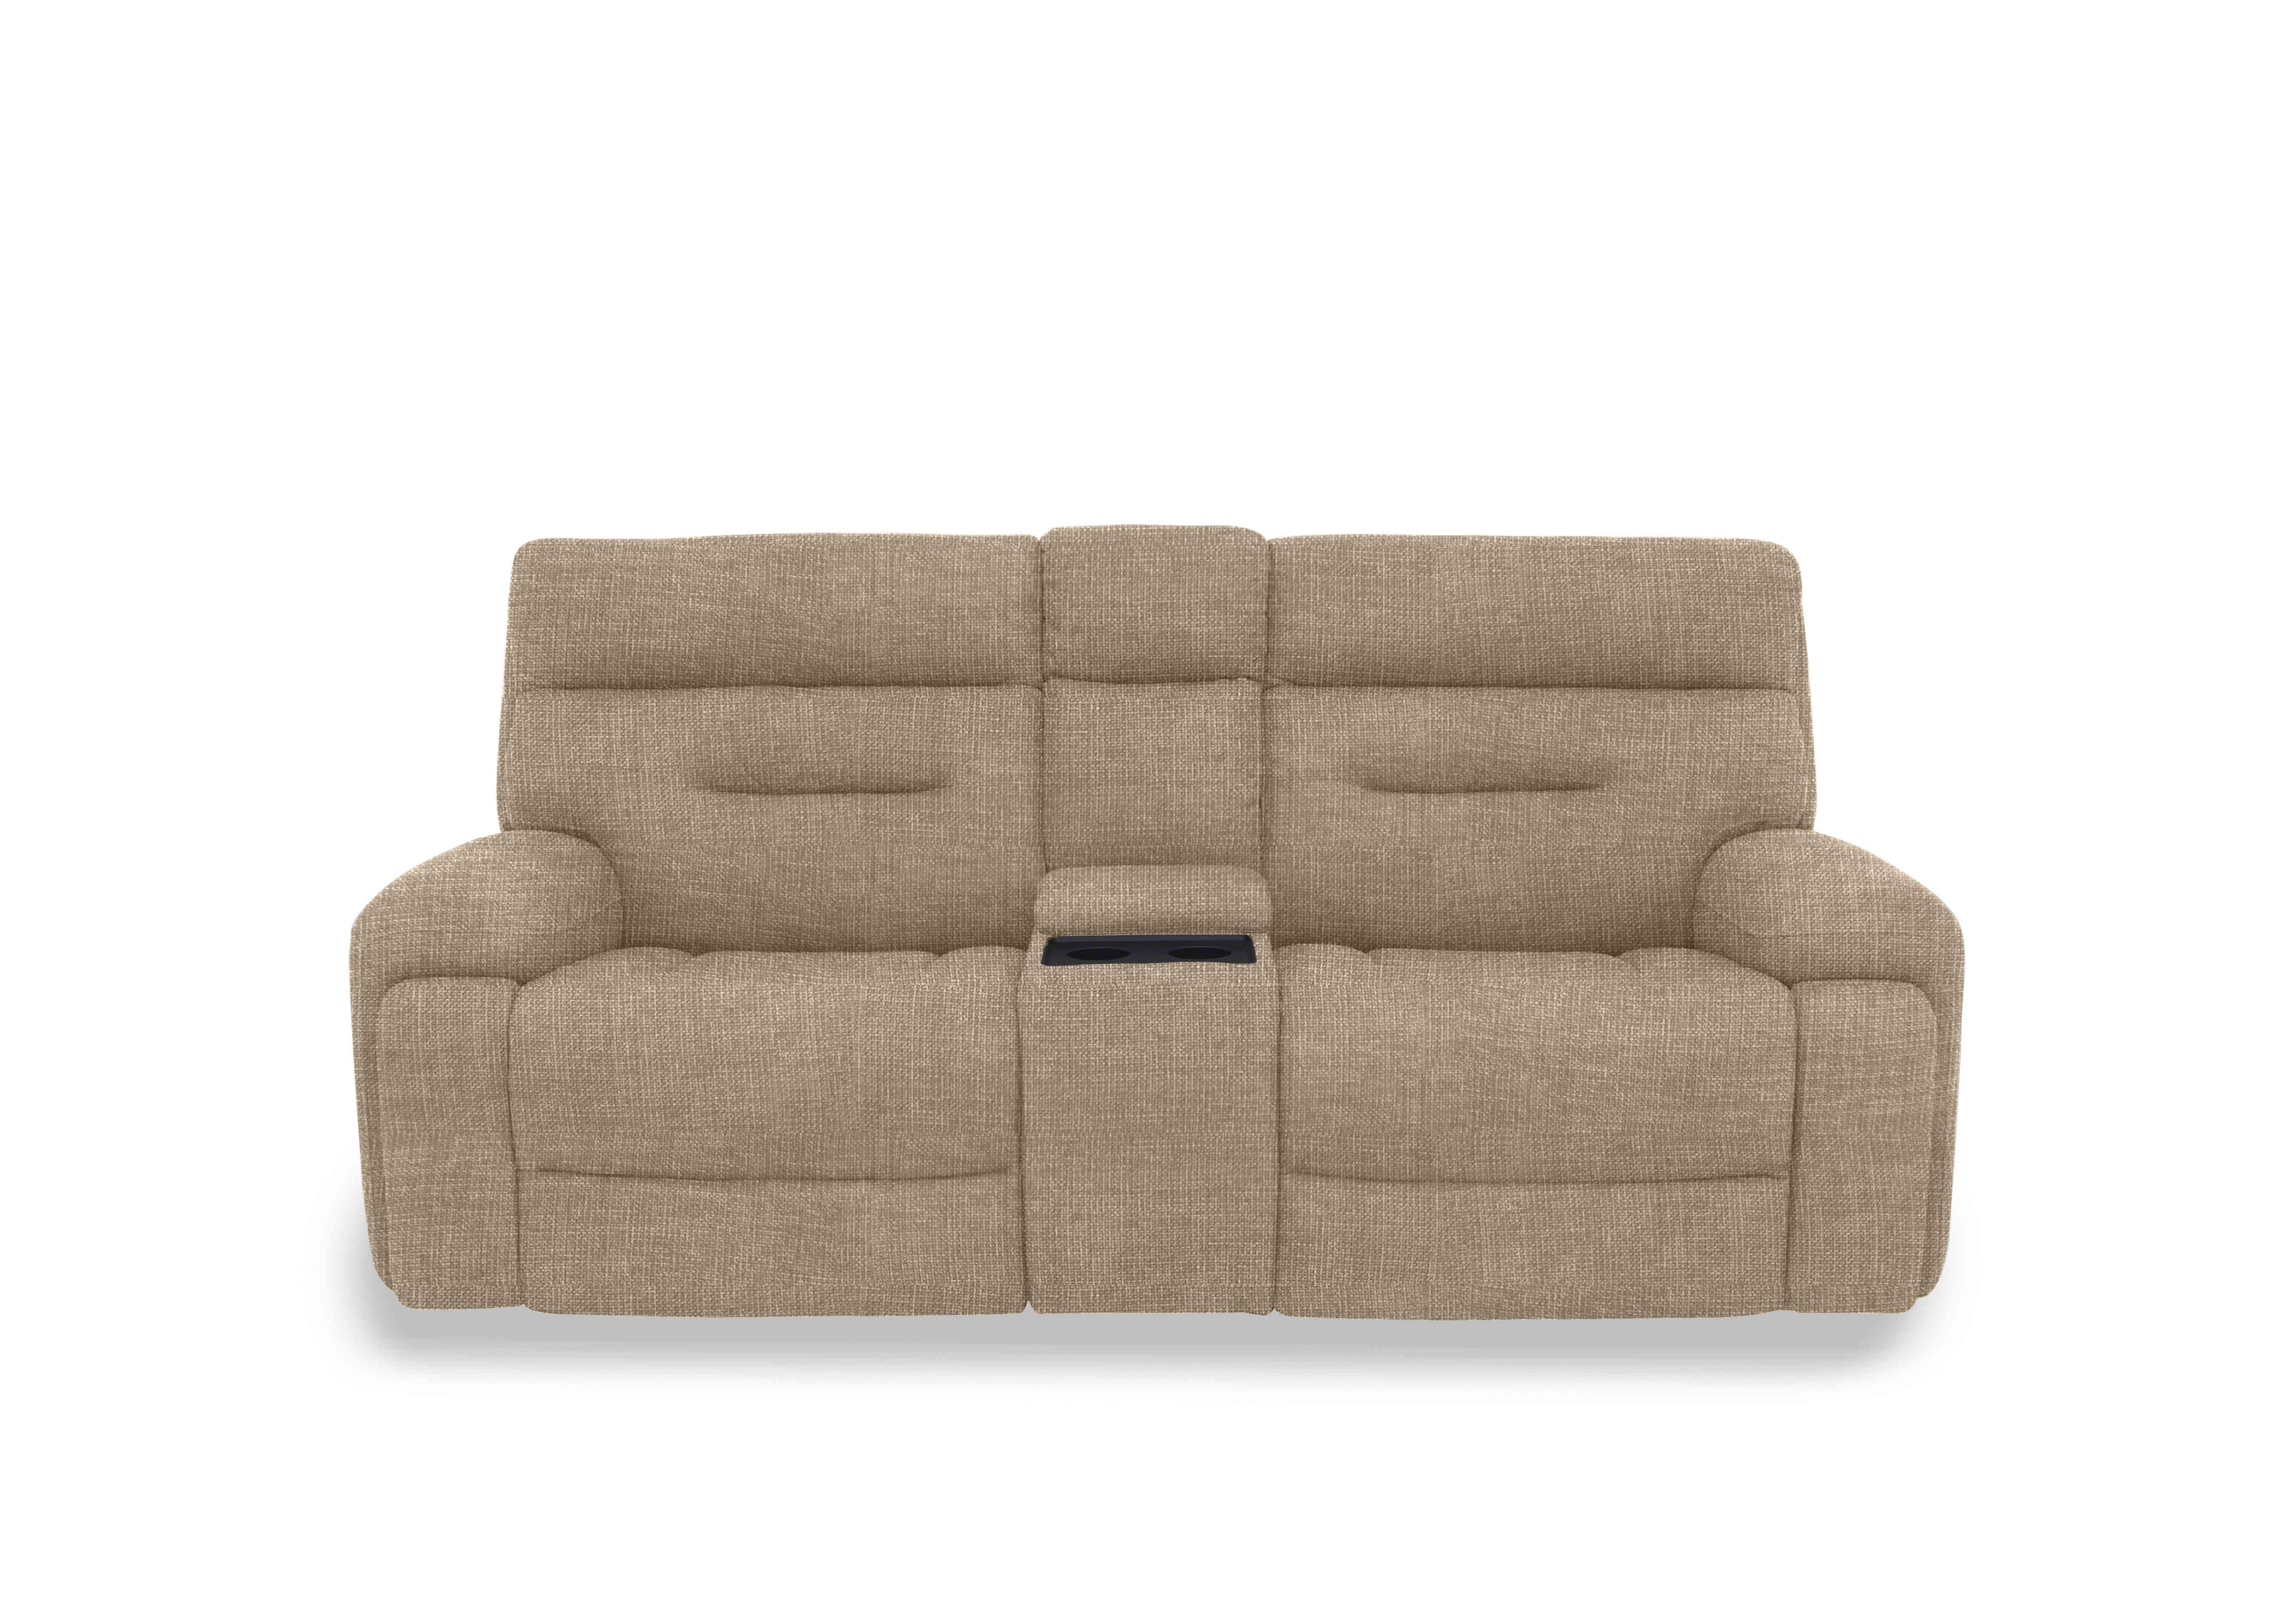 Cinemax Media 3 Seater Fabric Power Recliner Sofa with Power Headrests in We-0103 Weave Cocoa on Furniture Village